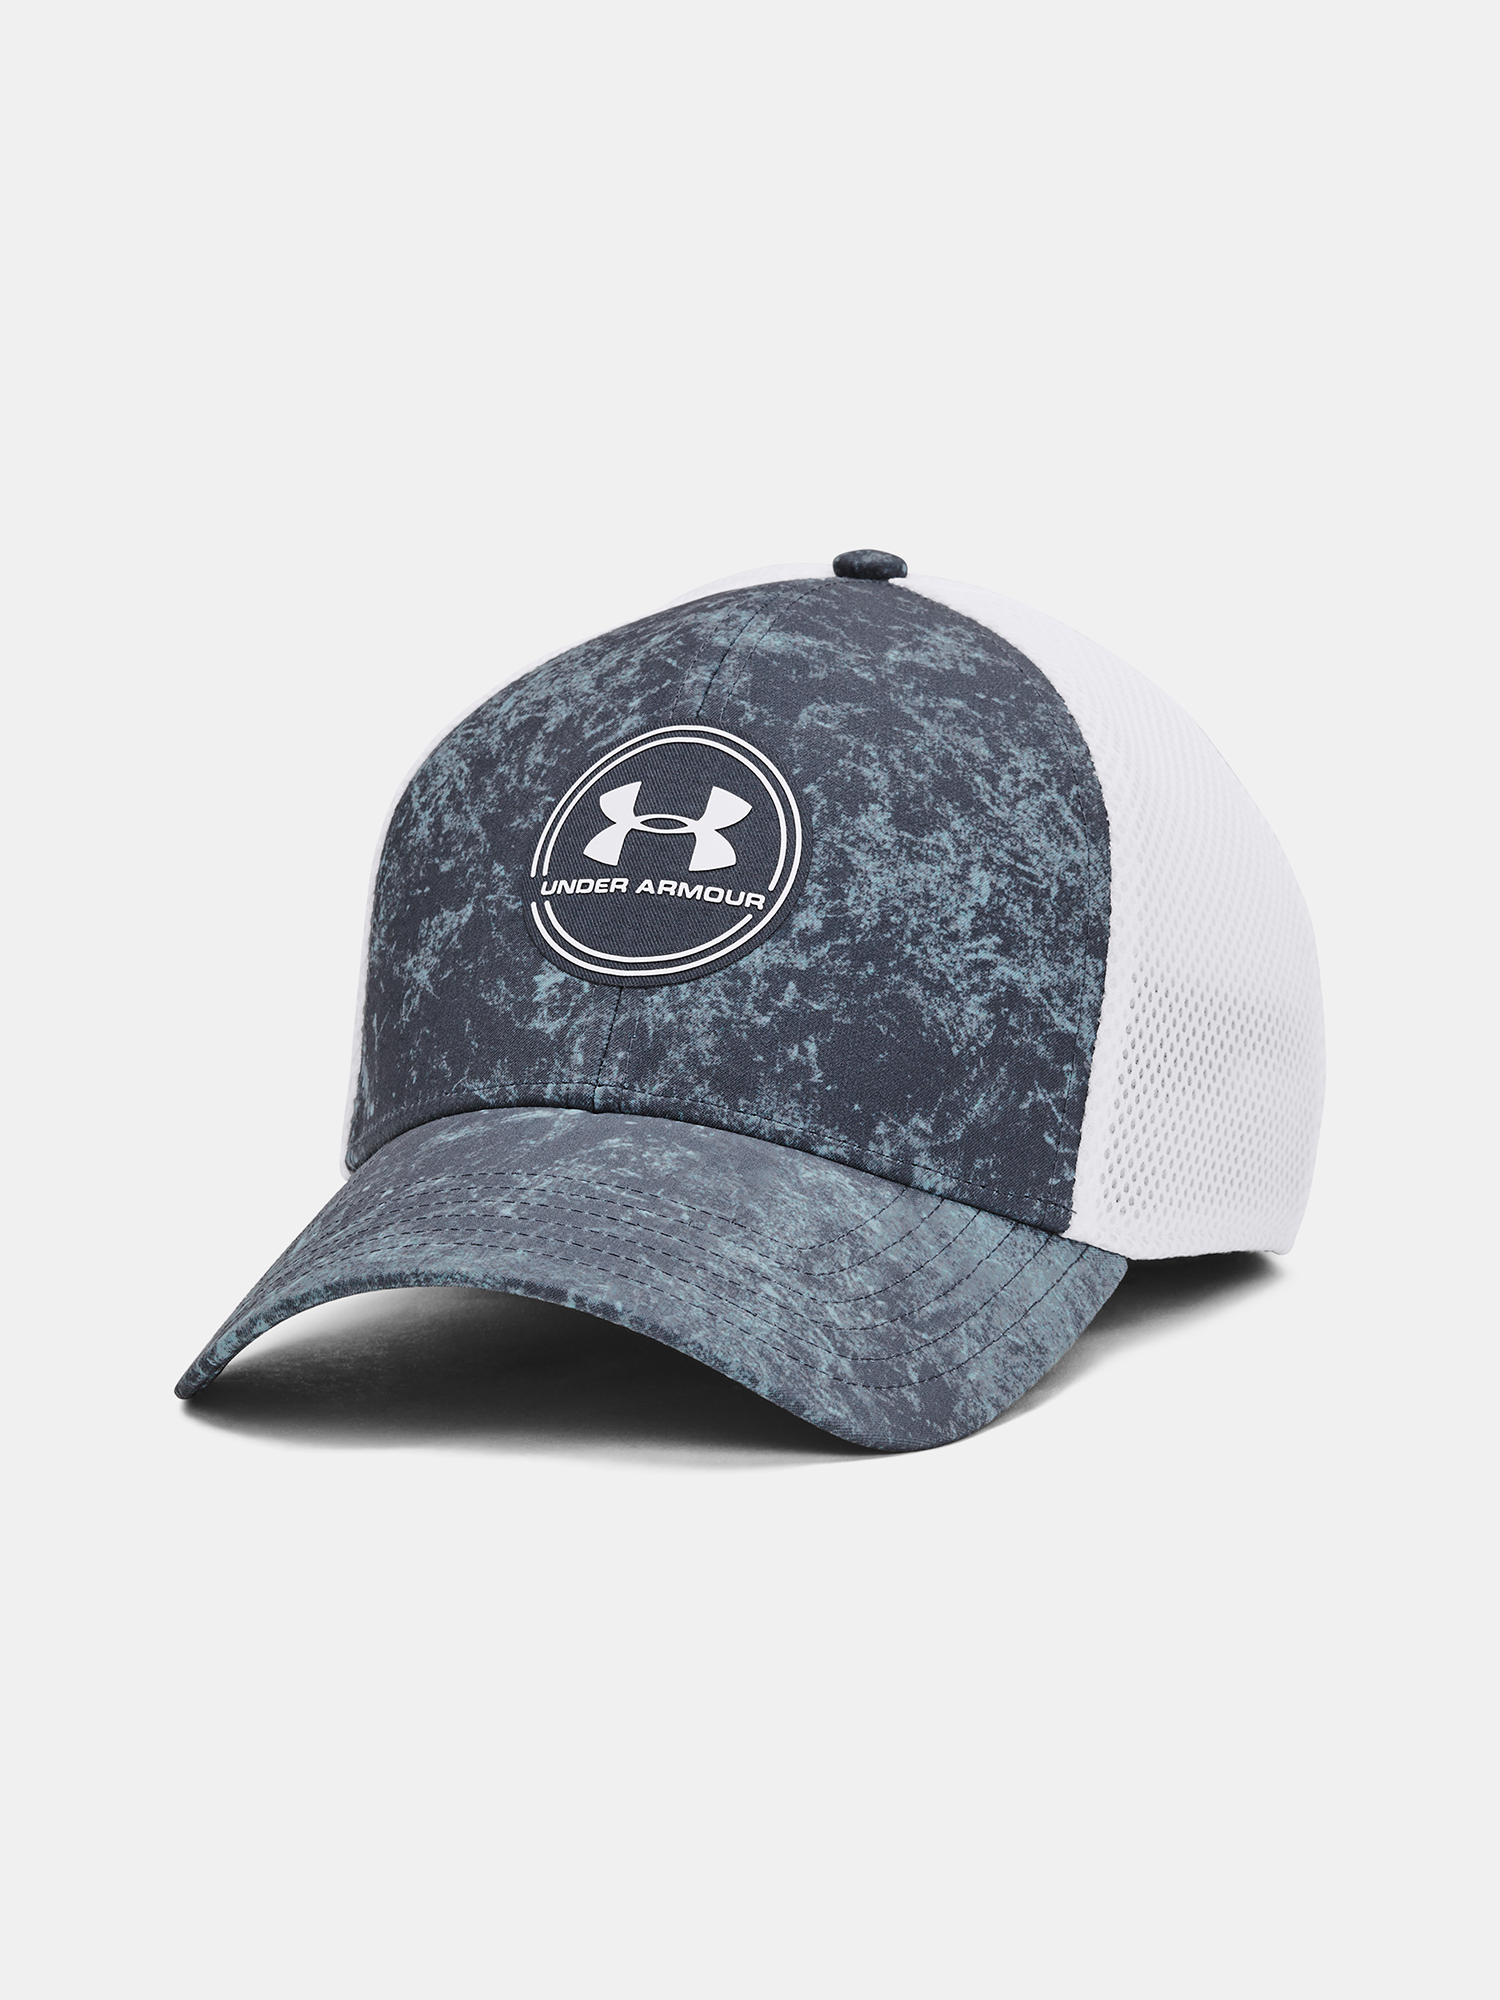 Under Armour Cap Iso-chill Driver Mesh-GRY - Men's